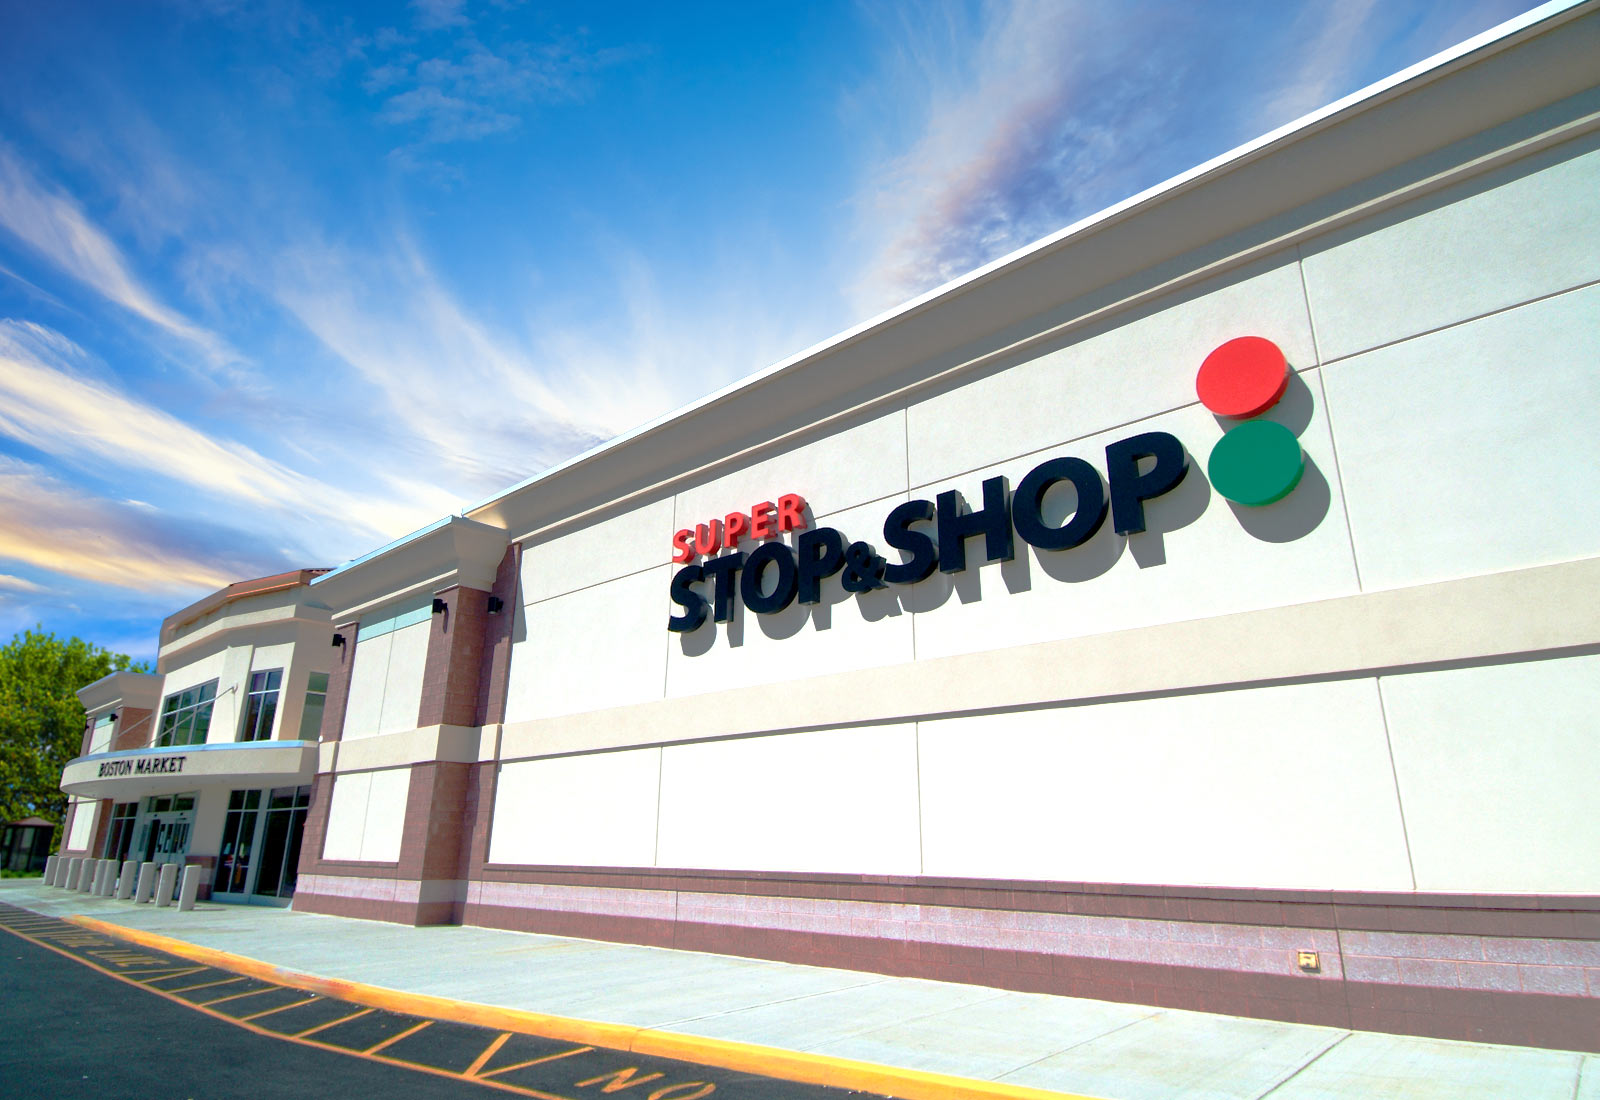 Stop and Shop Commercial Construction Company